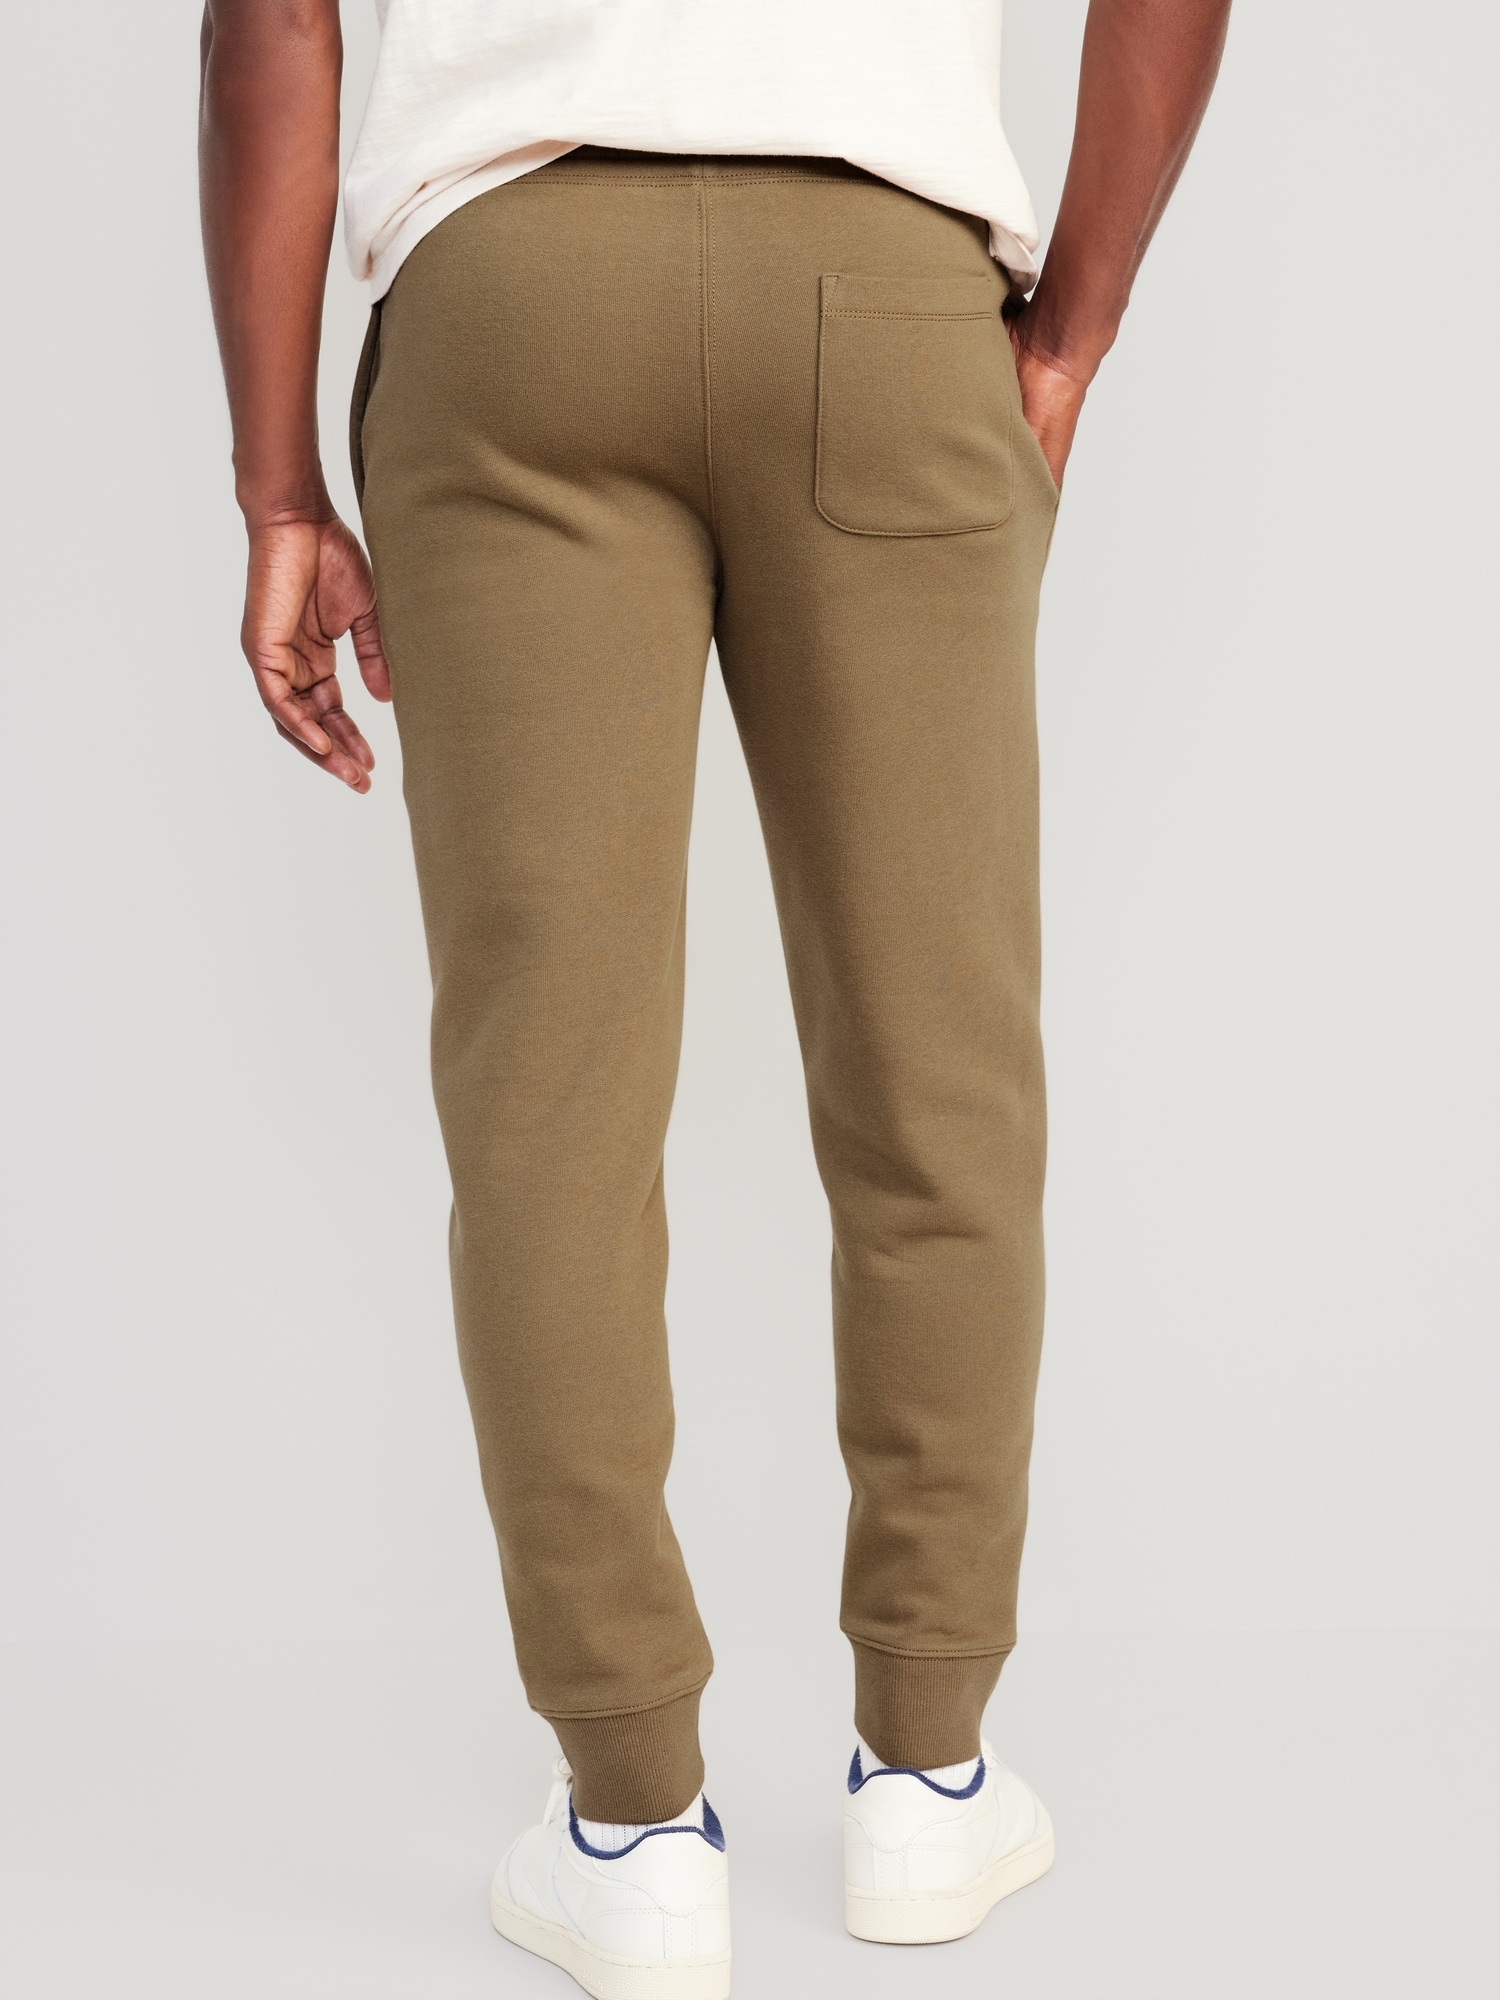 Tapered Jogger Sweatpants for Men | Old Navy